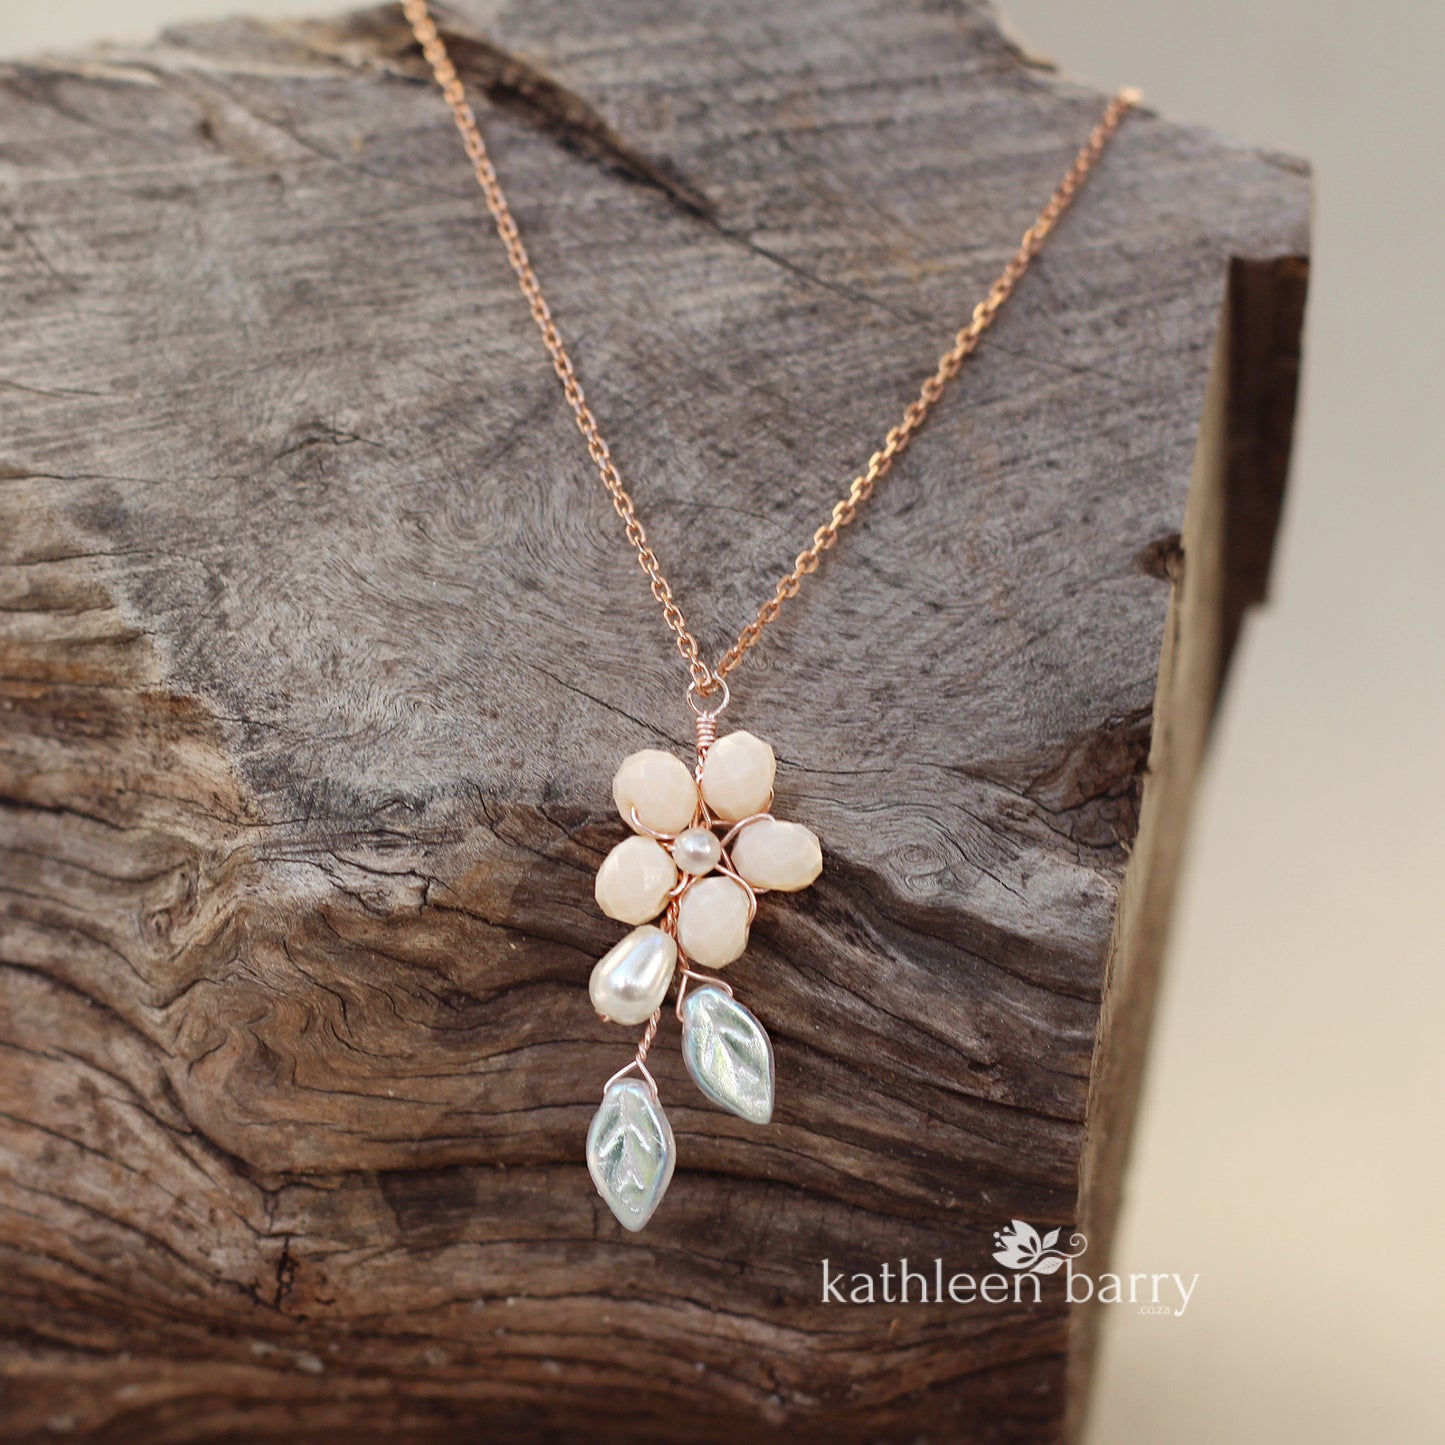 Quinn necklace - Assorted colors and finishes available, Rose gold, gold or silver